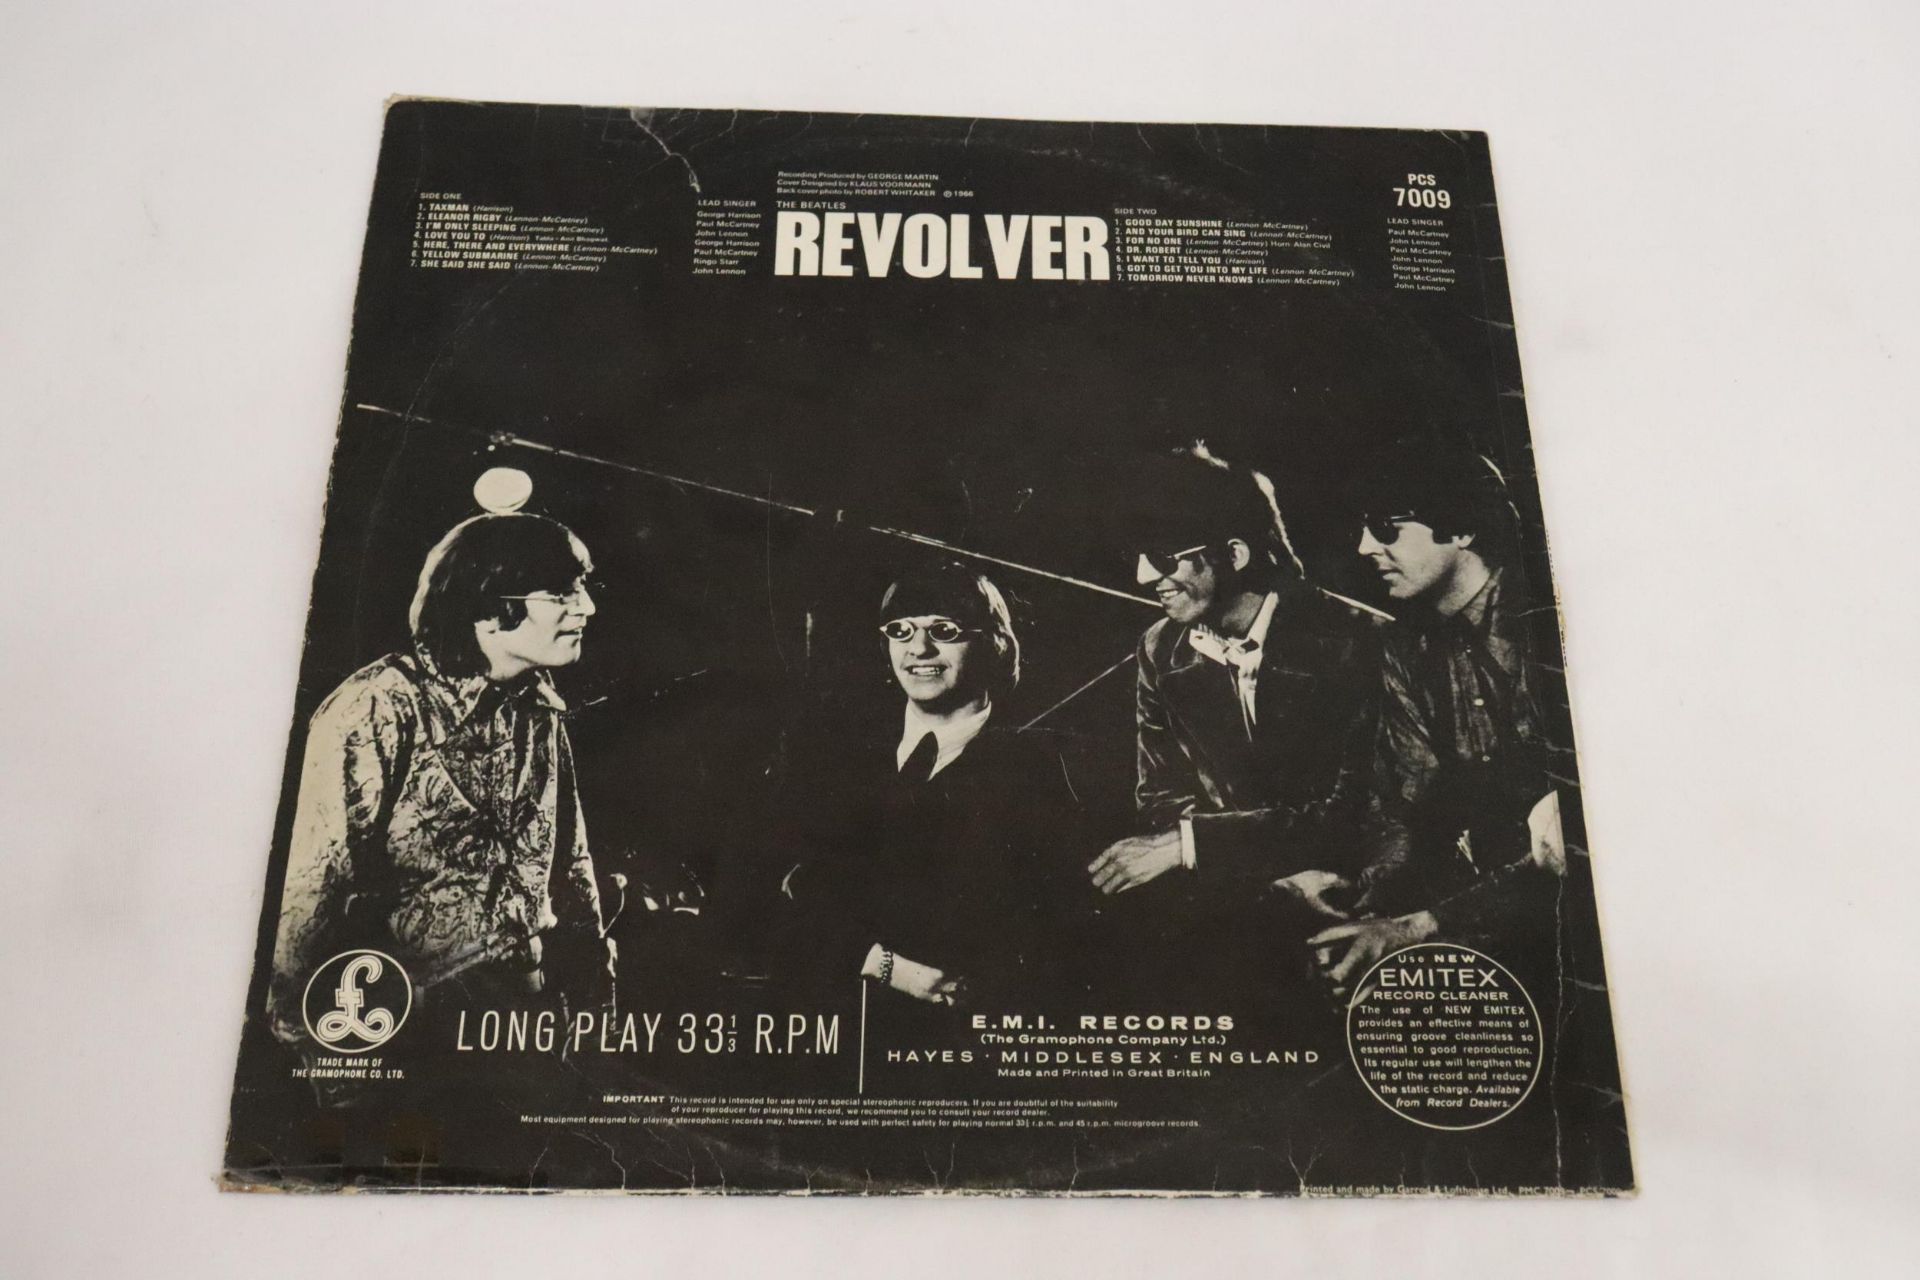 TWO BEATLES VINYL LP RECORDS, REVOLVER AND ABBEY ROAD - NO SLEEVE ON ABBEY ROAD - Image 4 of 6